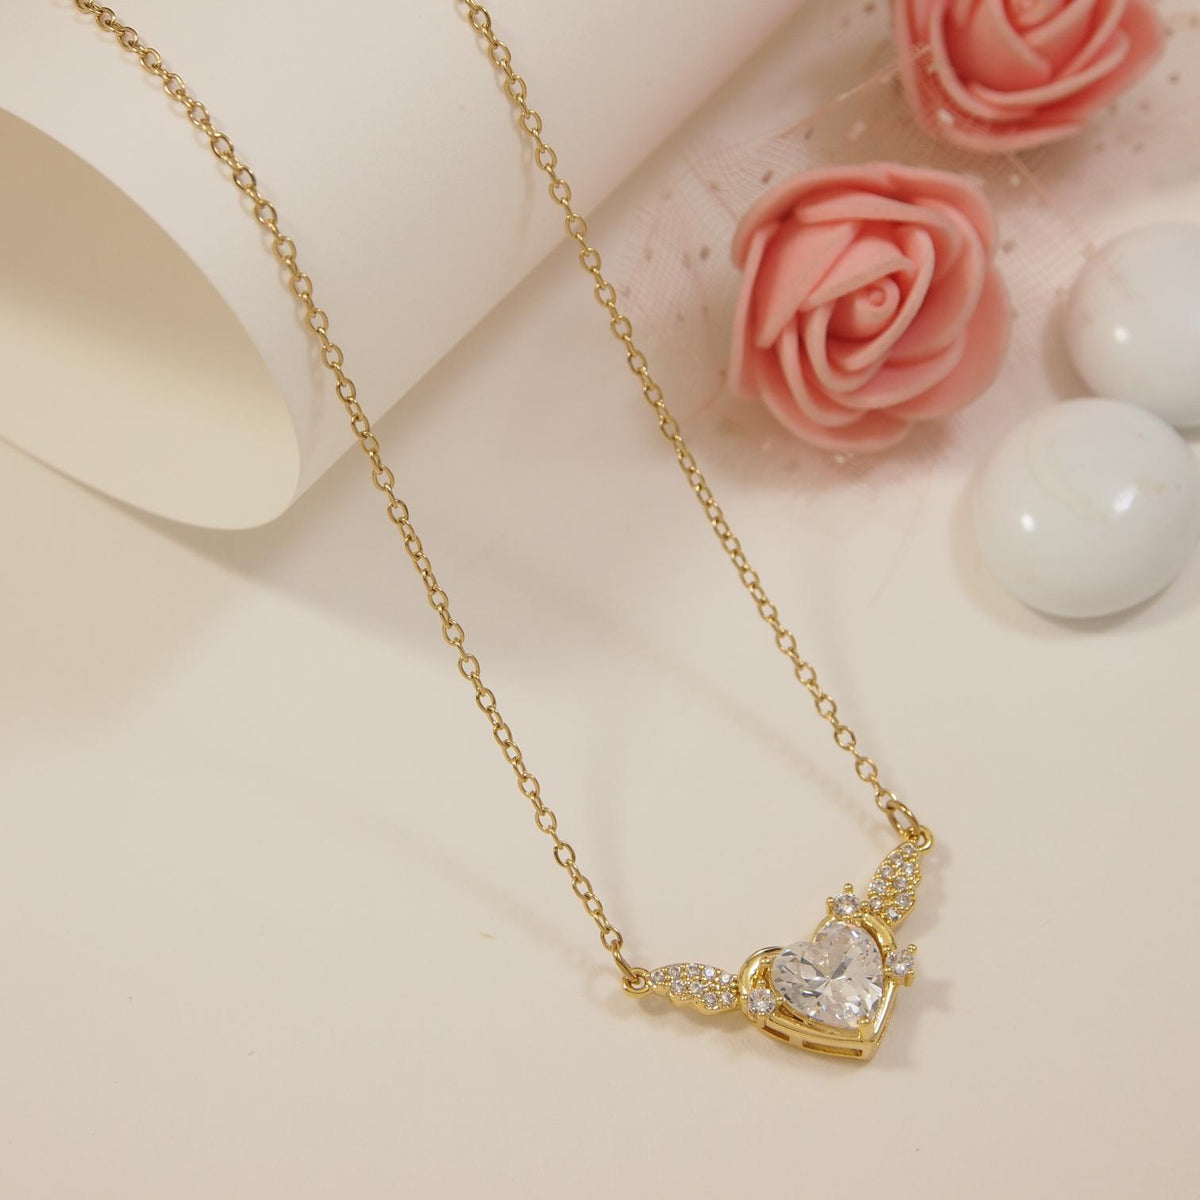 Stainless Steel Heart Shaped Angel Wing Pendent Chain Necklace  - STNK 4991